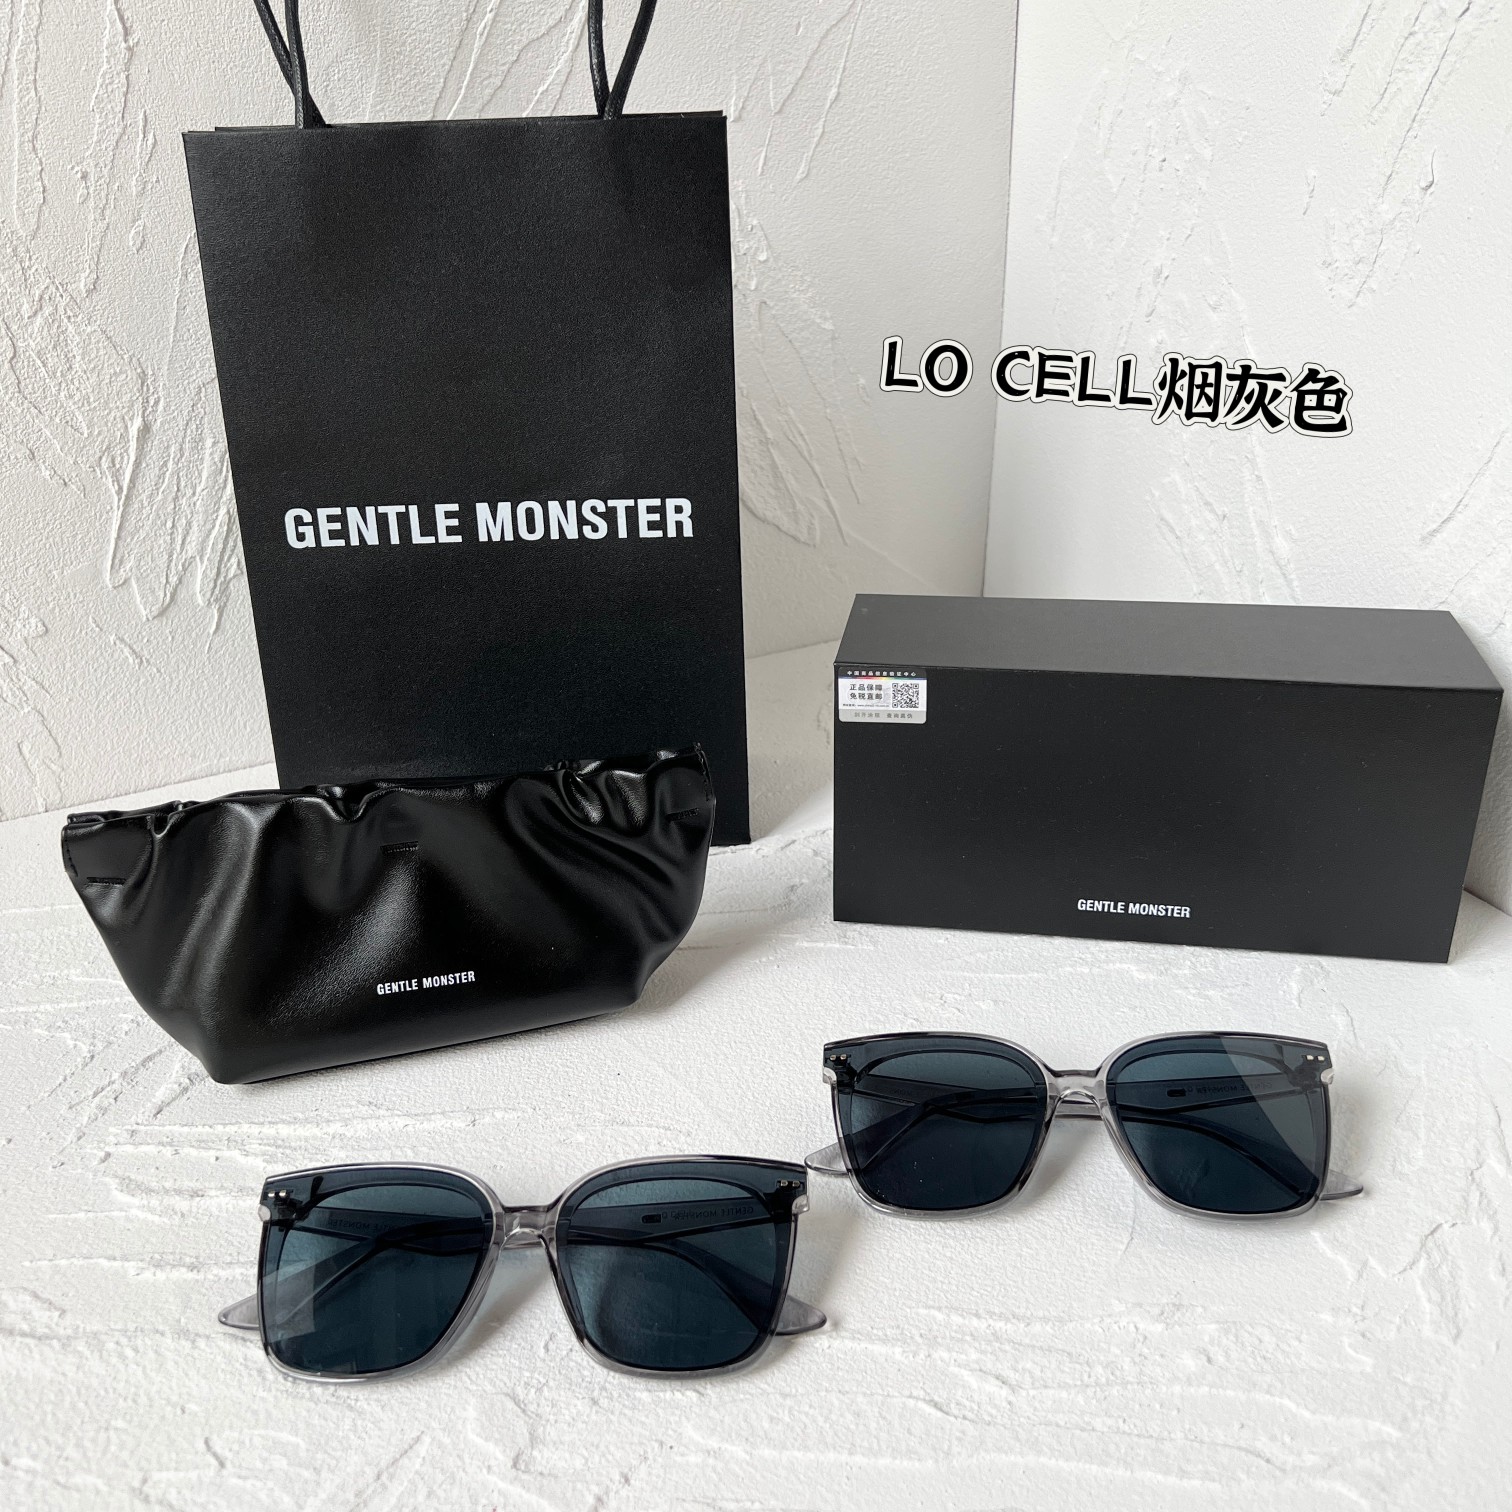 FIND] Chanel sunglasses, Seller- Lat-Lon aka Edward glasses. ¥370.  Protection- UV400. To order, you need to message him, added yupoo in  comments, send him a pic of what you want & go